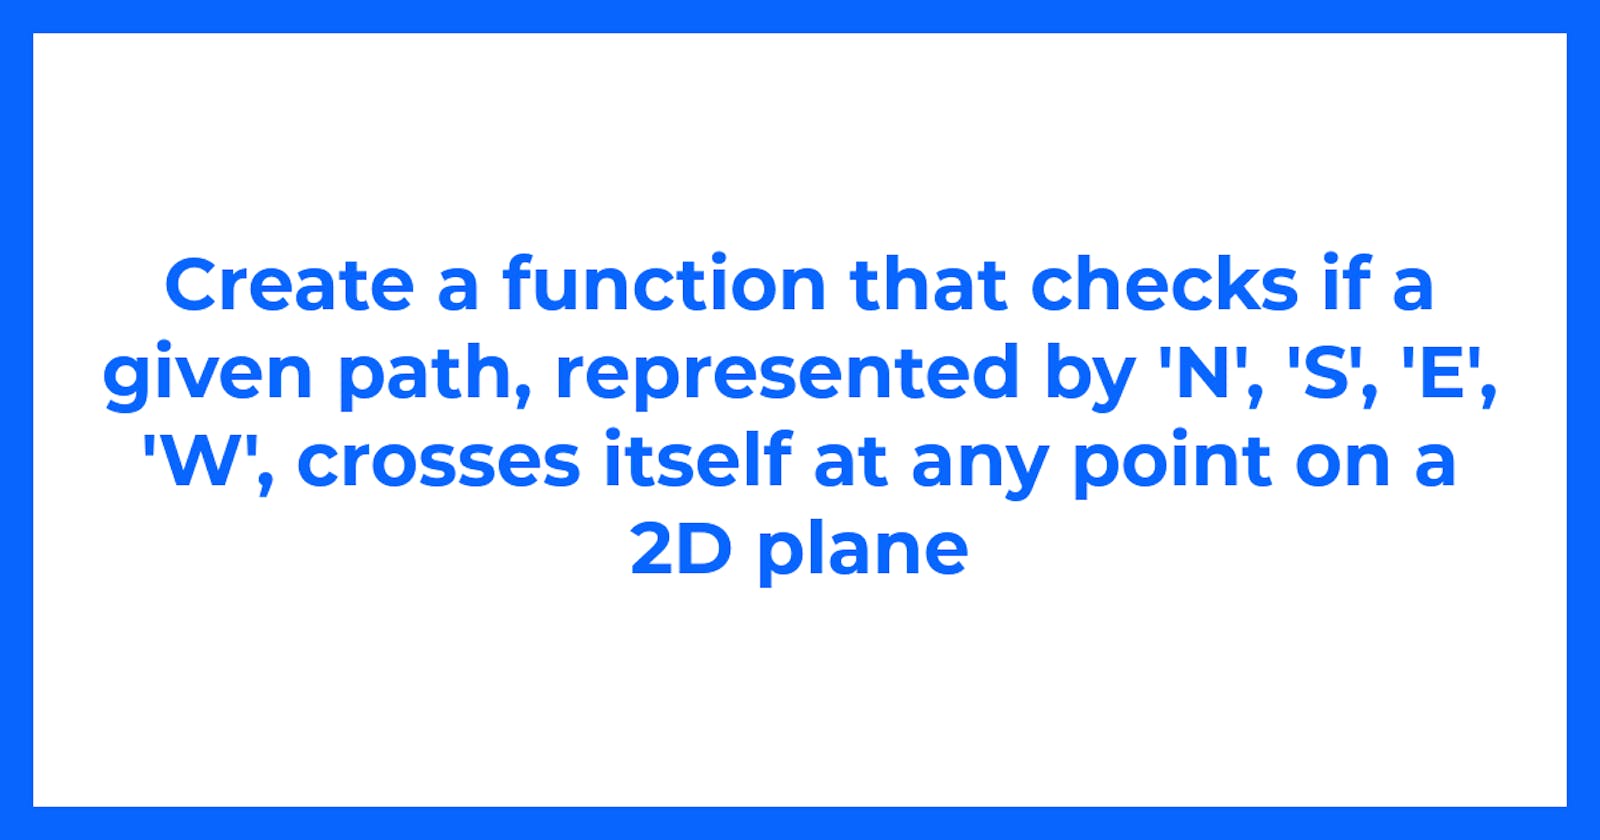 Create a function that checks if a given path, represented by 'N', 'S', 'E', 'W', crosses itself at any point on a 2D plane.